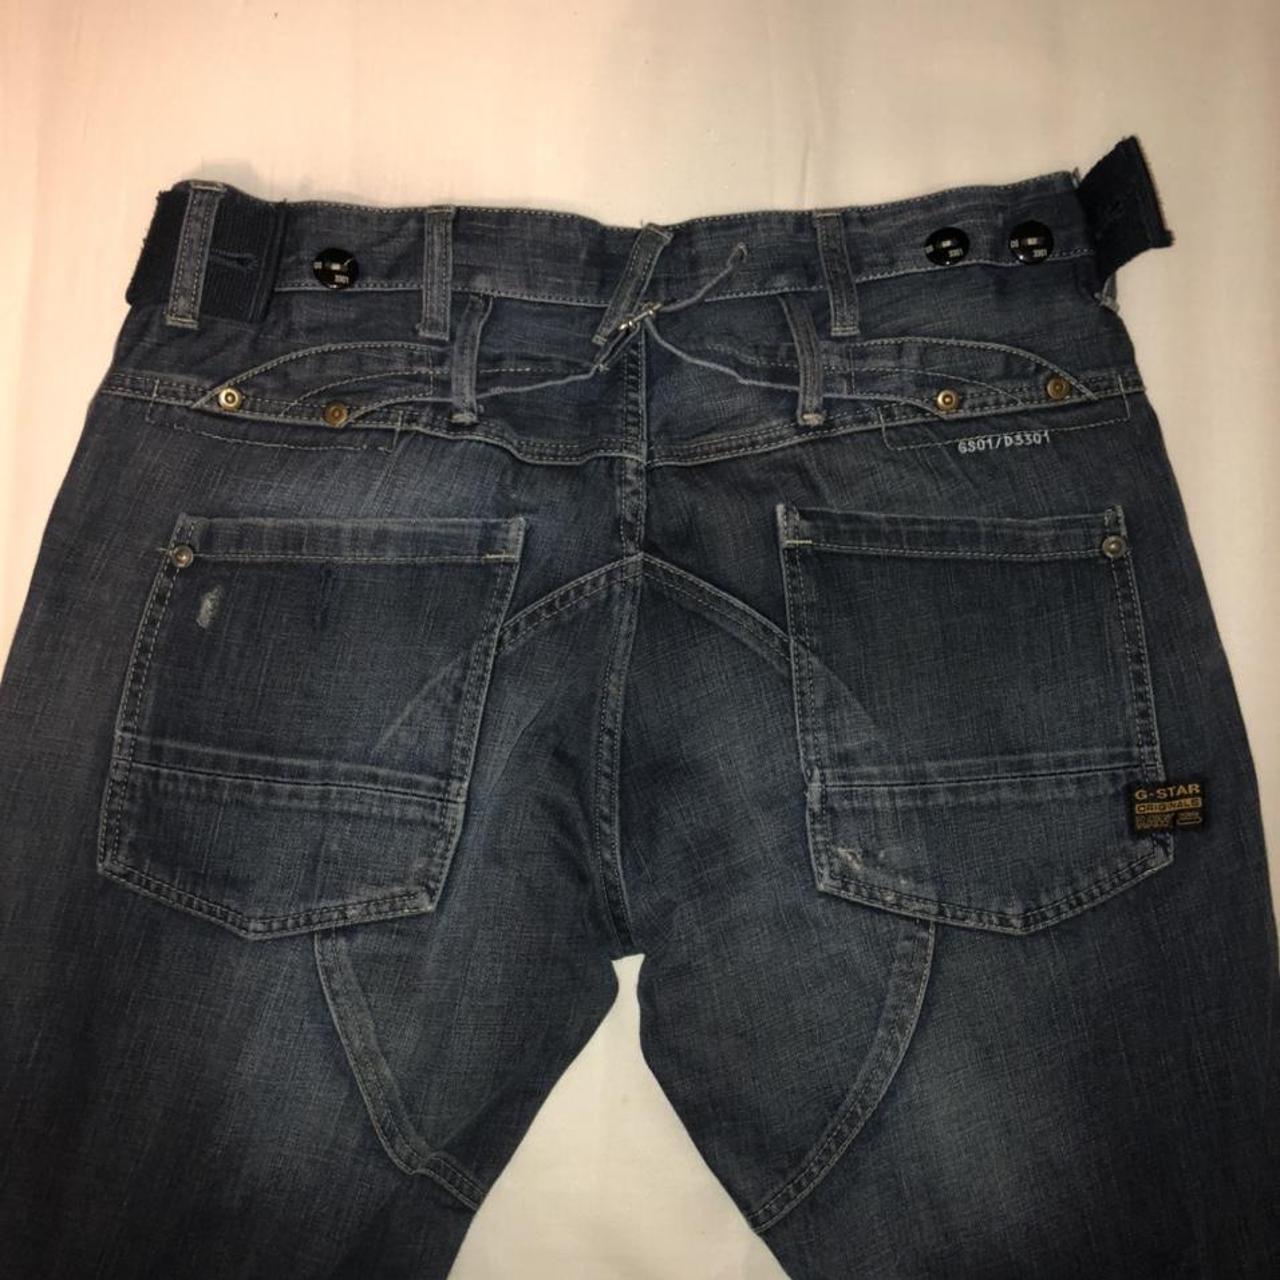 Vintage G-star raw baggy jeans These jeans are from... - Depop